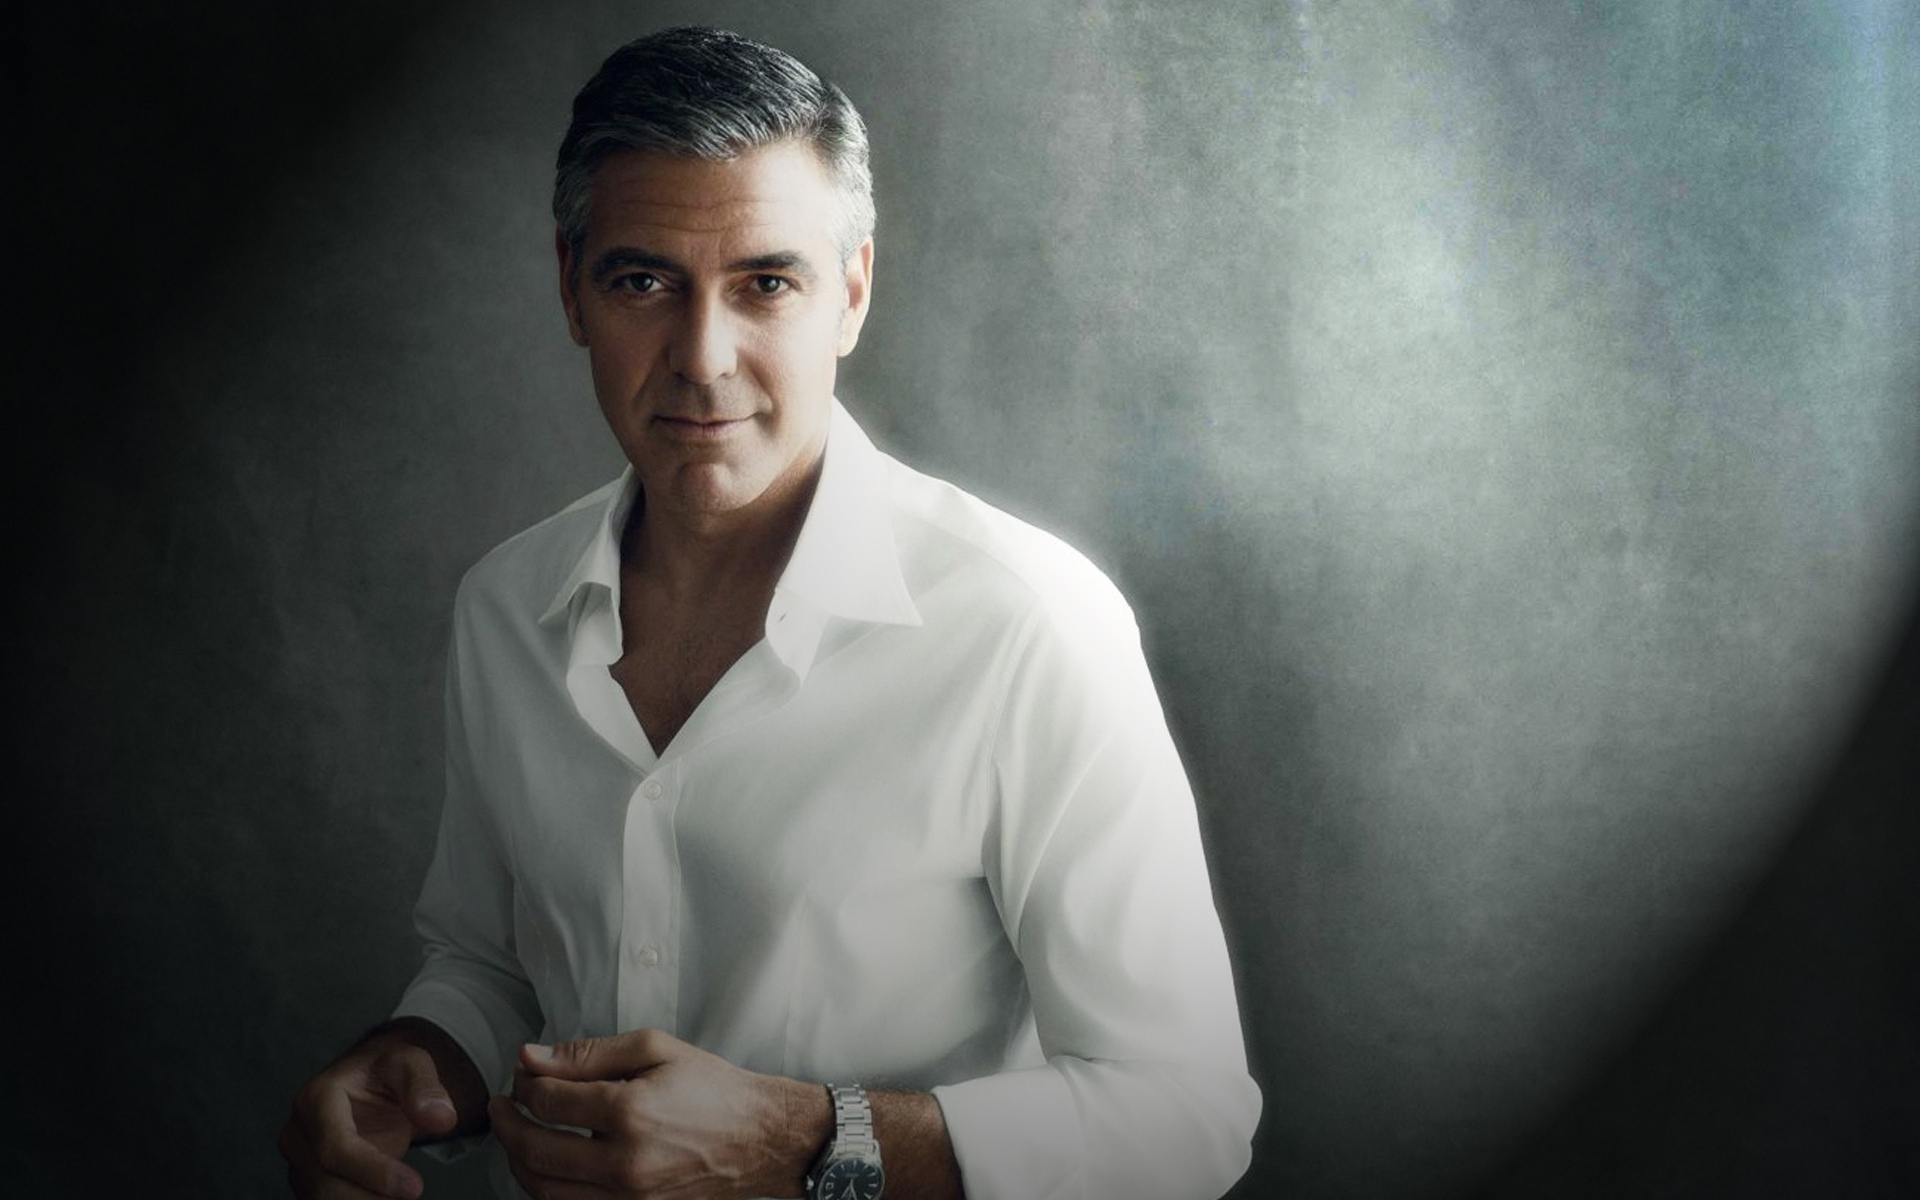 Facebook Covers For George Clooney PoPoPicscom